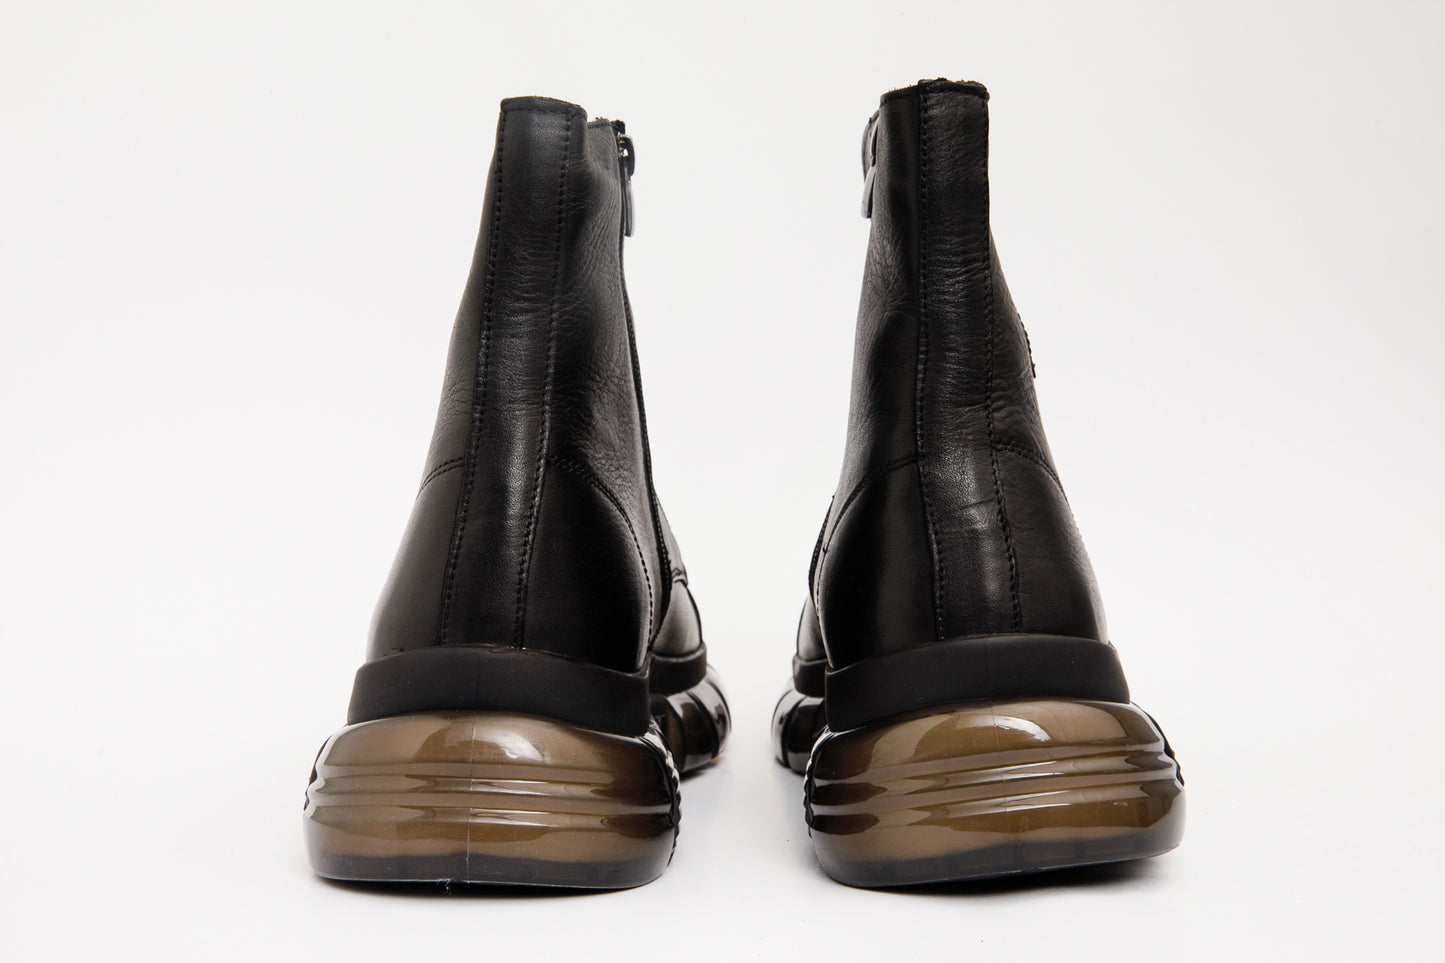 The Ottova Black Leather Lace-Up Sneaker Men Boot with a Zipper